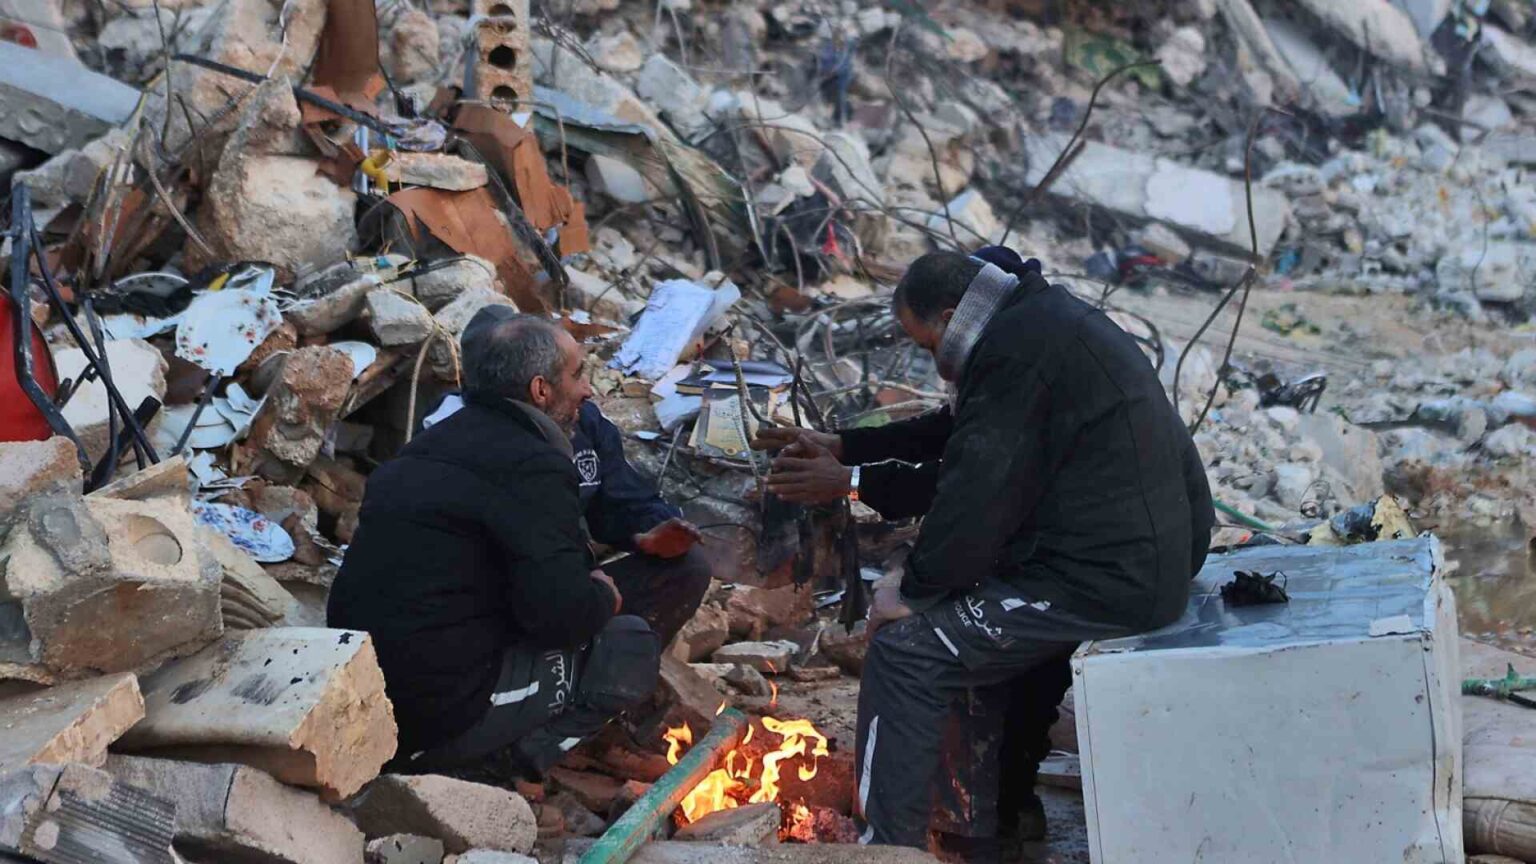 Turkey earthquake: Icy weather hampers rescue efforts as death toll tops 20,000